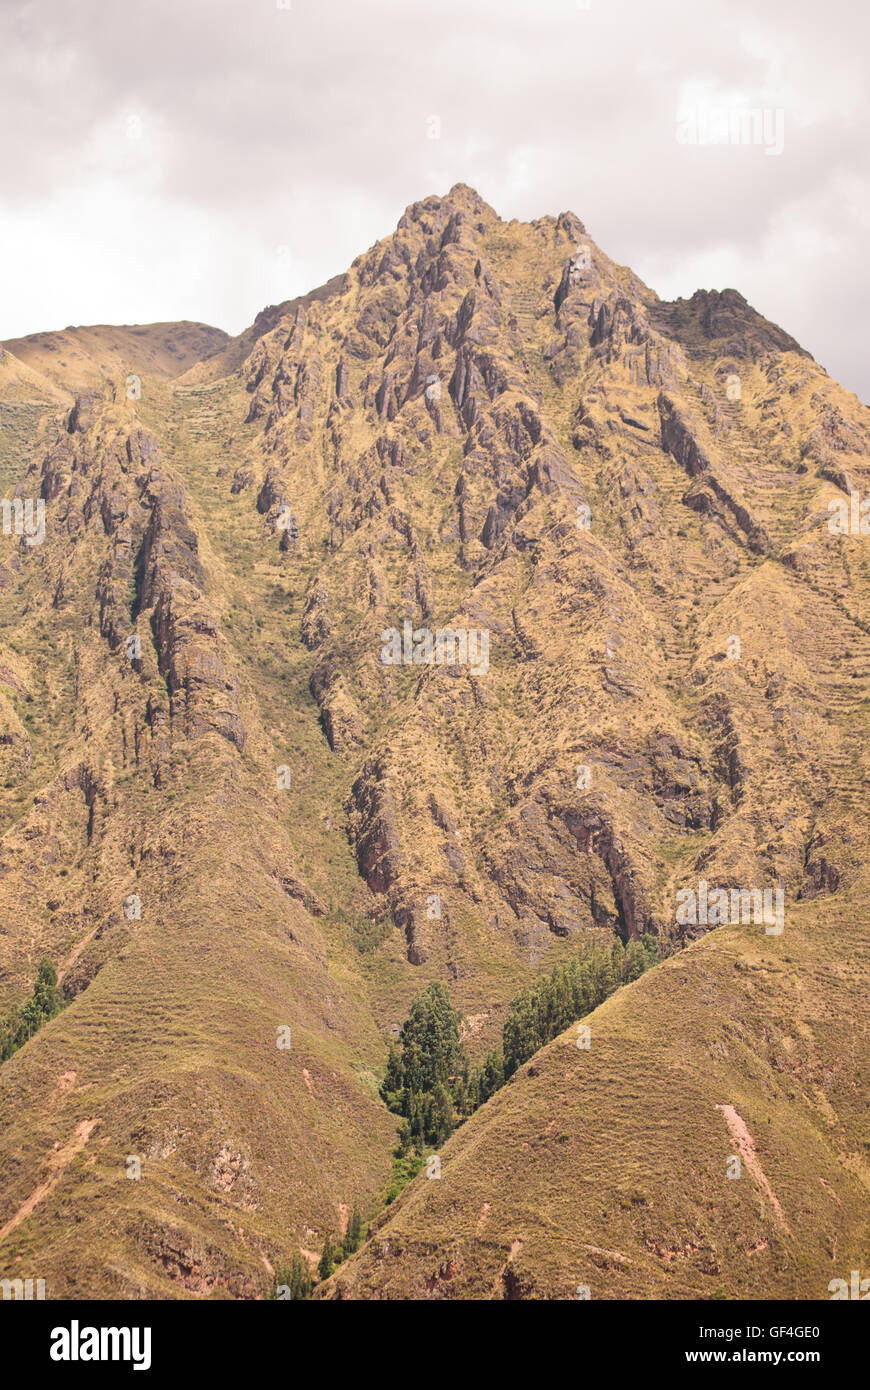 The steep mountains of the Andes Stock Photo